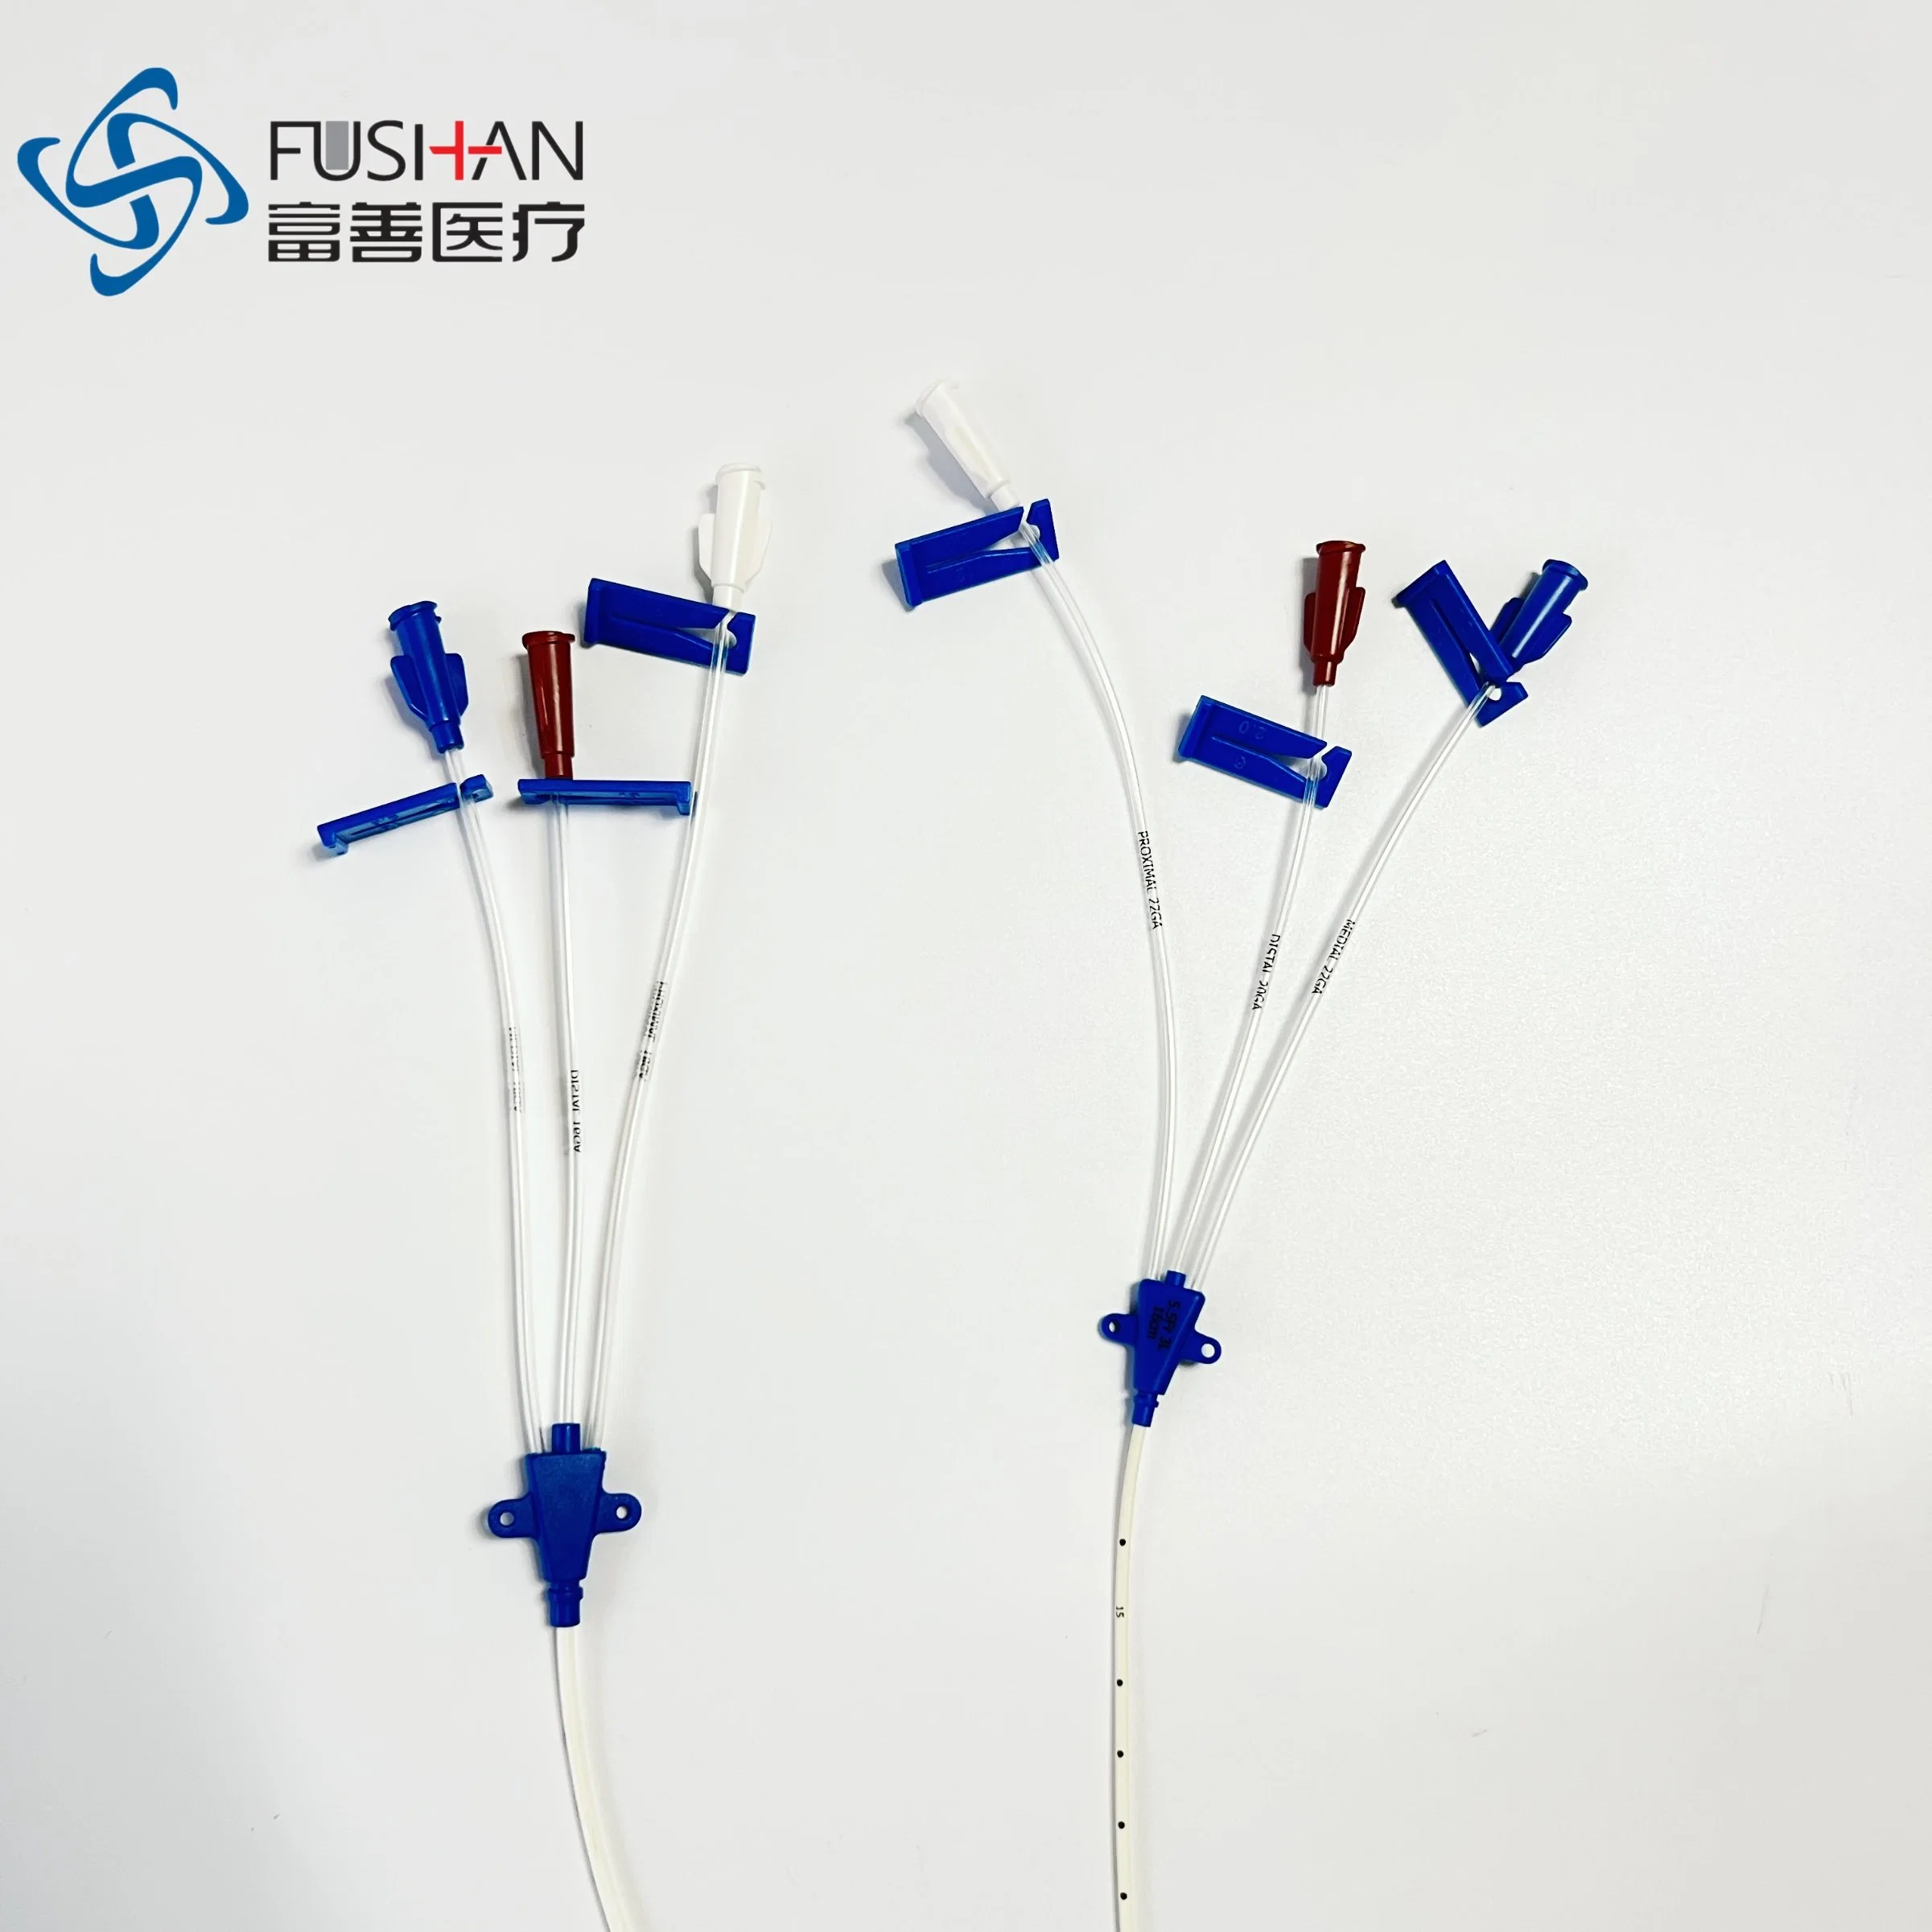 Fushan Medical Supply Kit Related Searches CVC Dialysis Catheter Infusion Set Disposables Equipment Catheter Chlorine Disinfectiondical